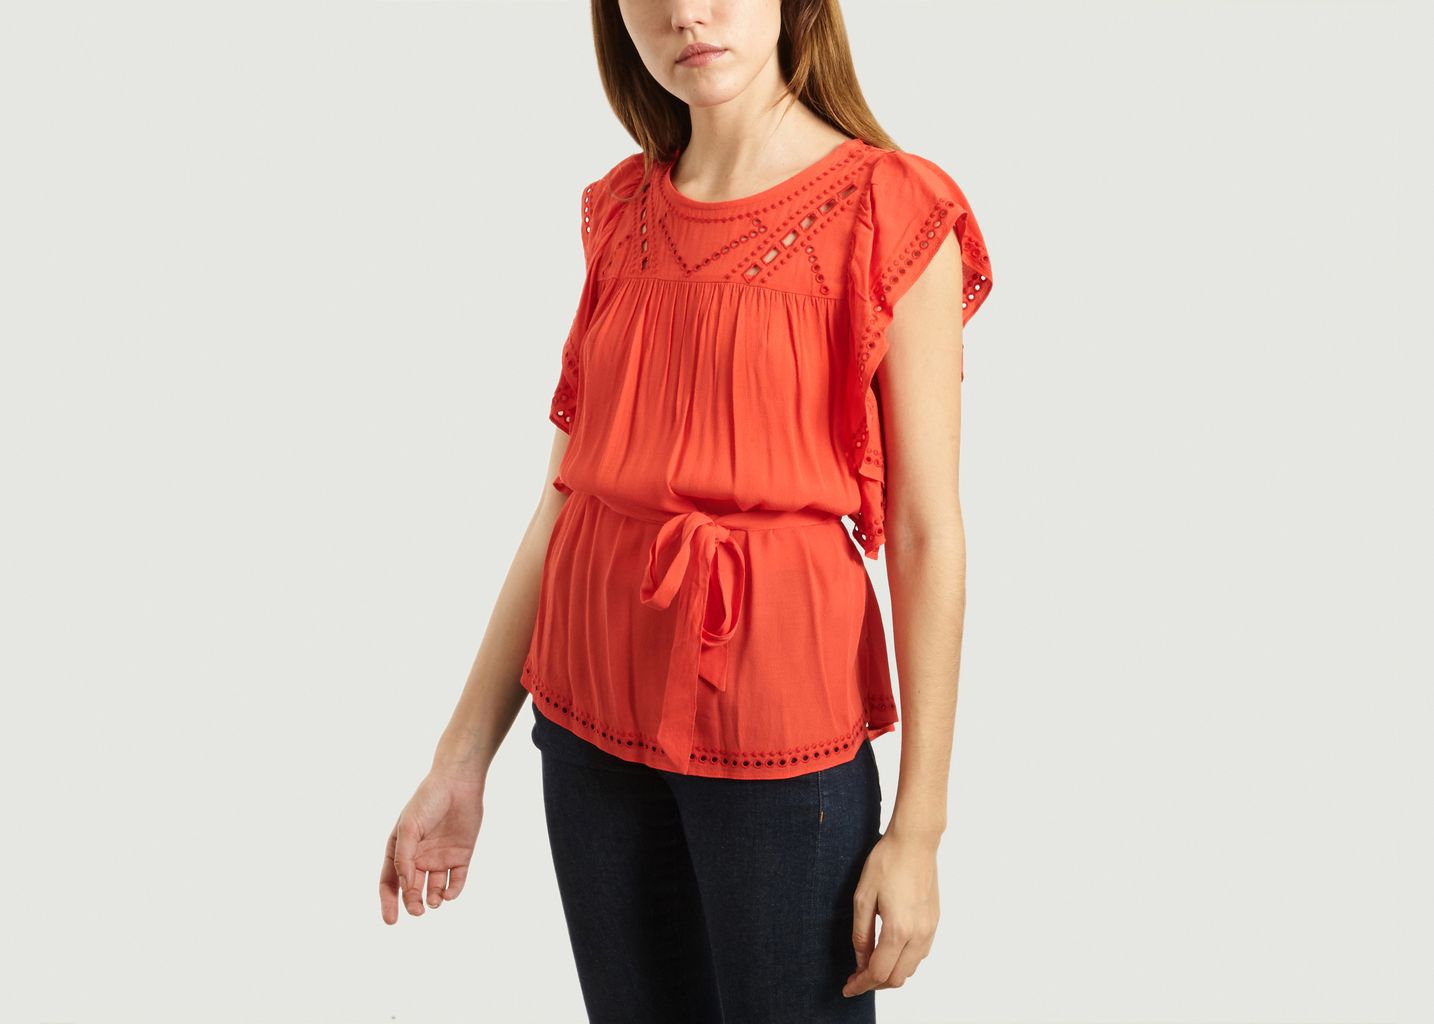 Lany belted blouse - Suncoo